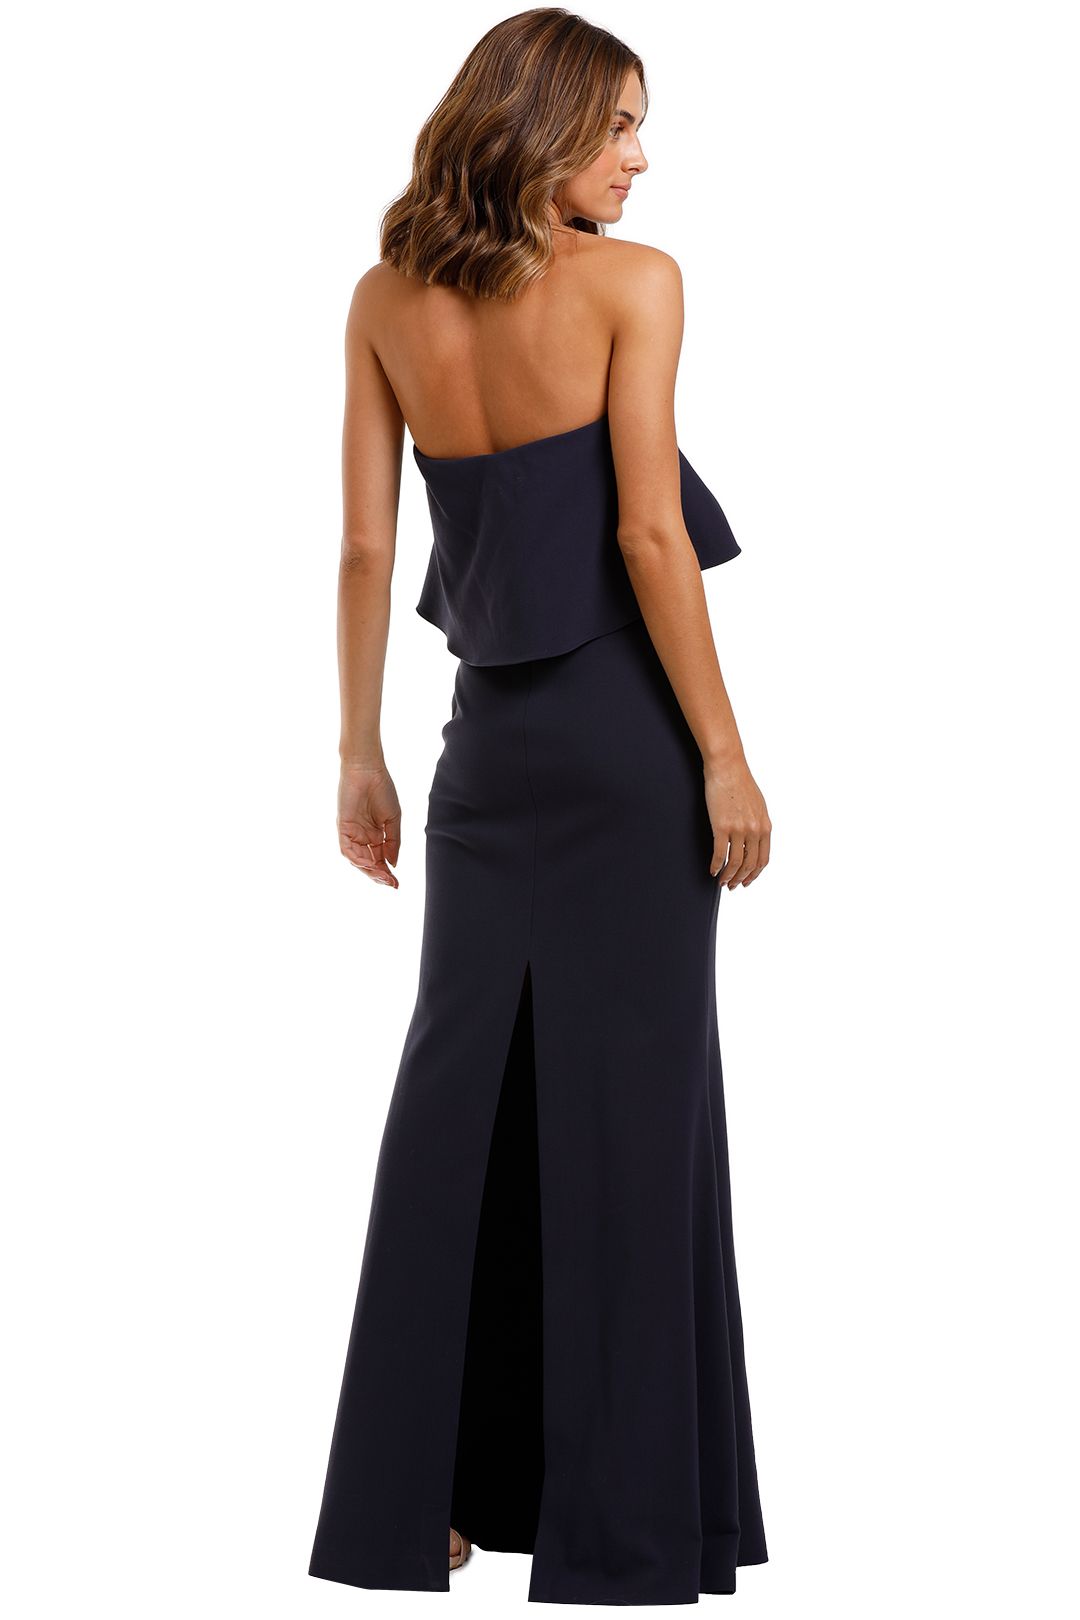 Likely NYC Driggs Gown Navy Bodycon